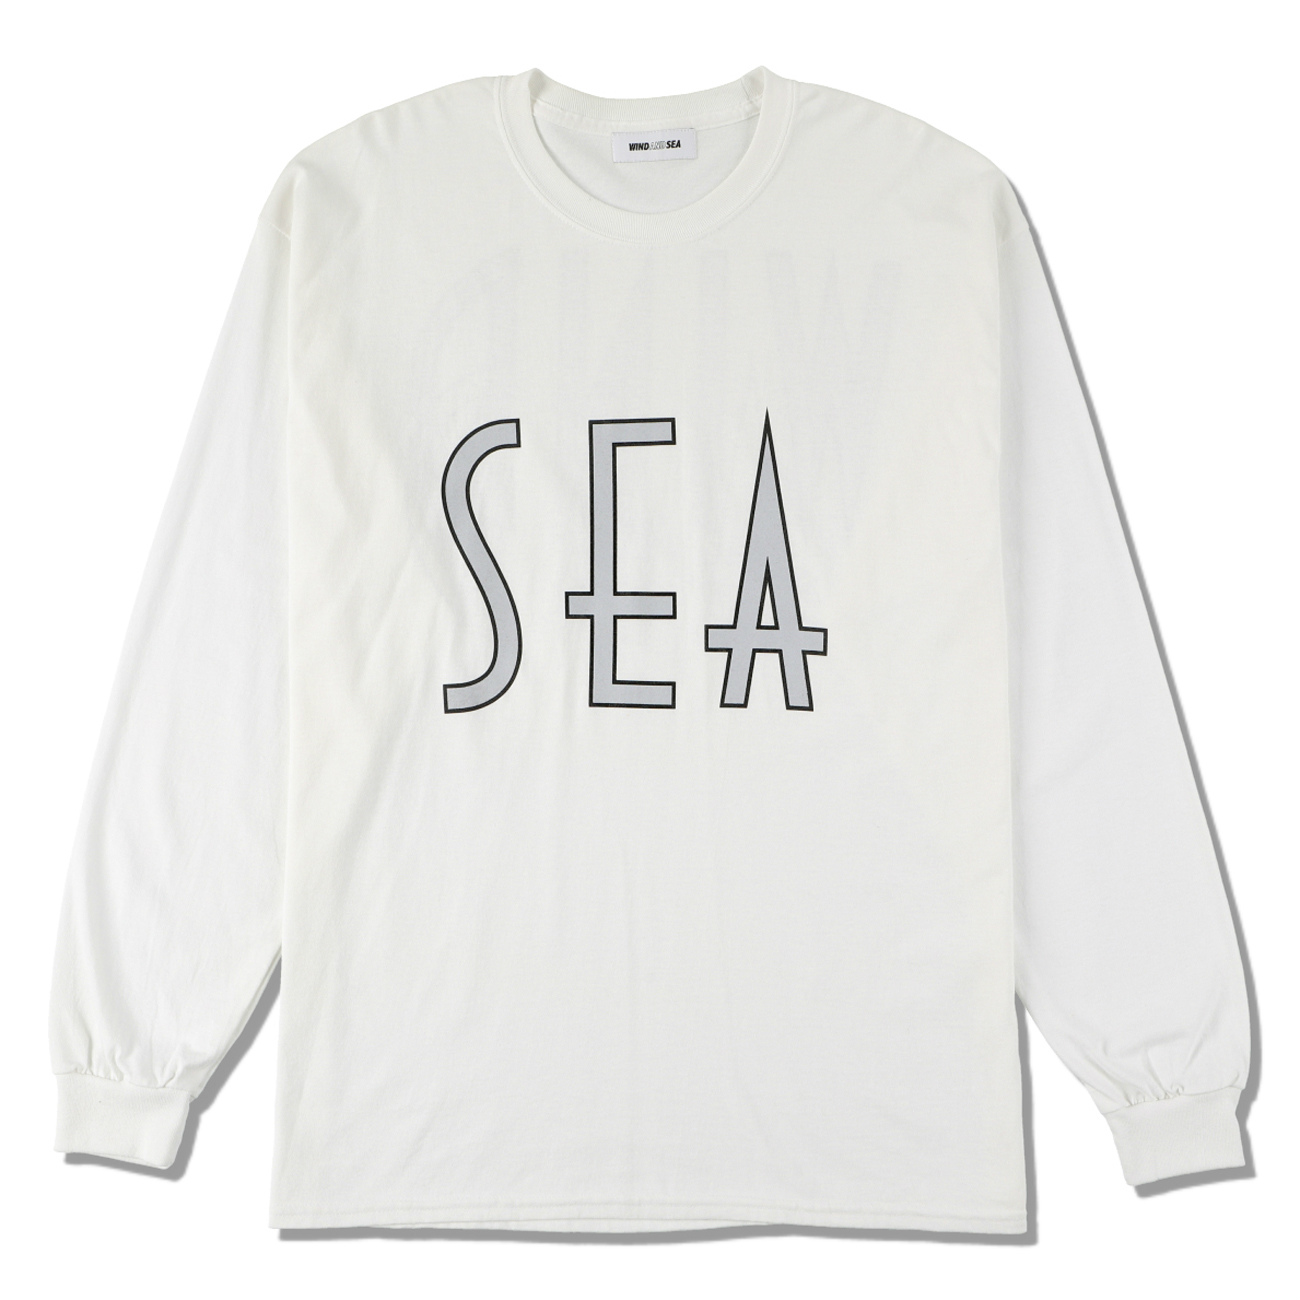 WIND AND SEA / SEA (DLM) T-SHIRT WHITE L